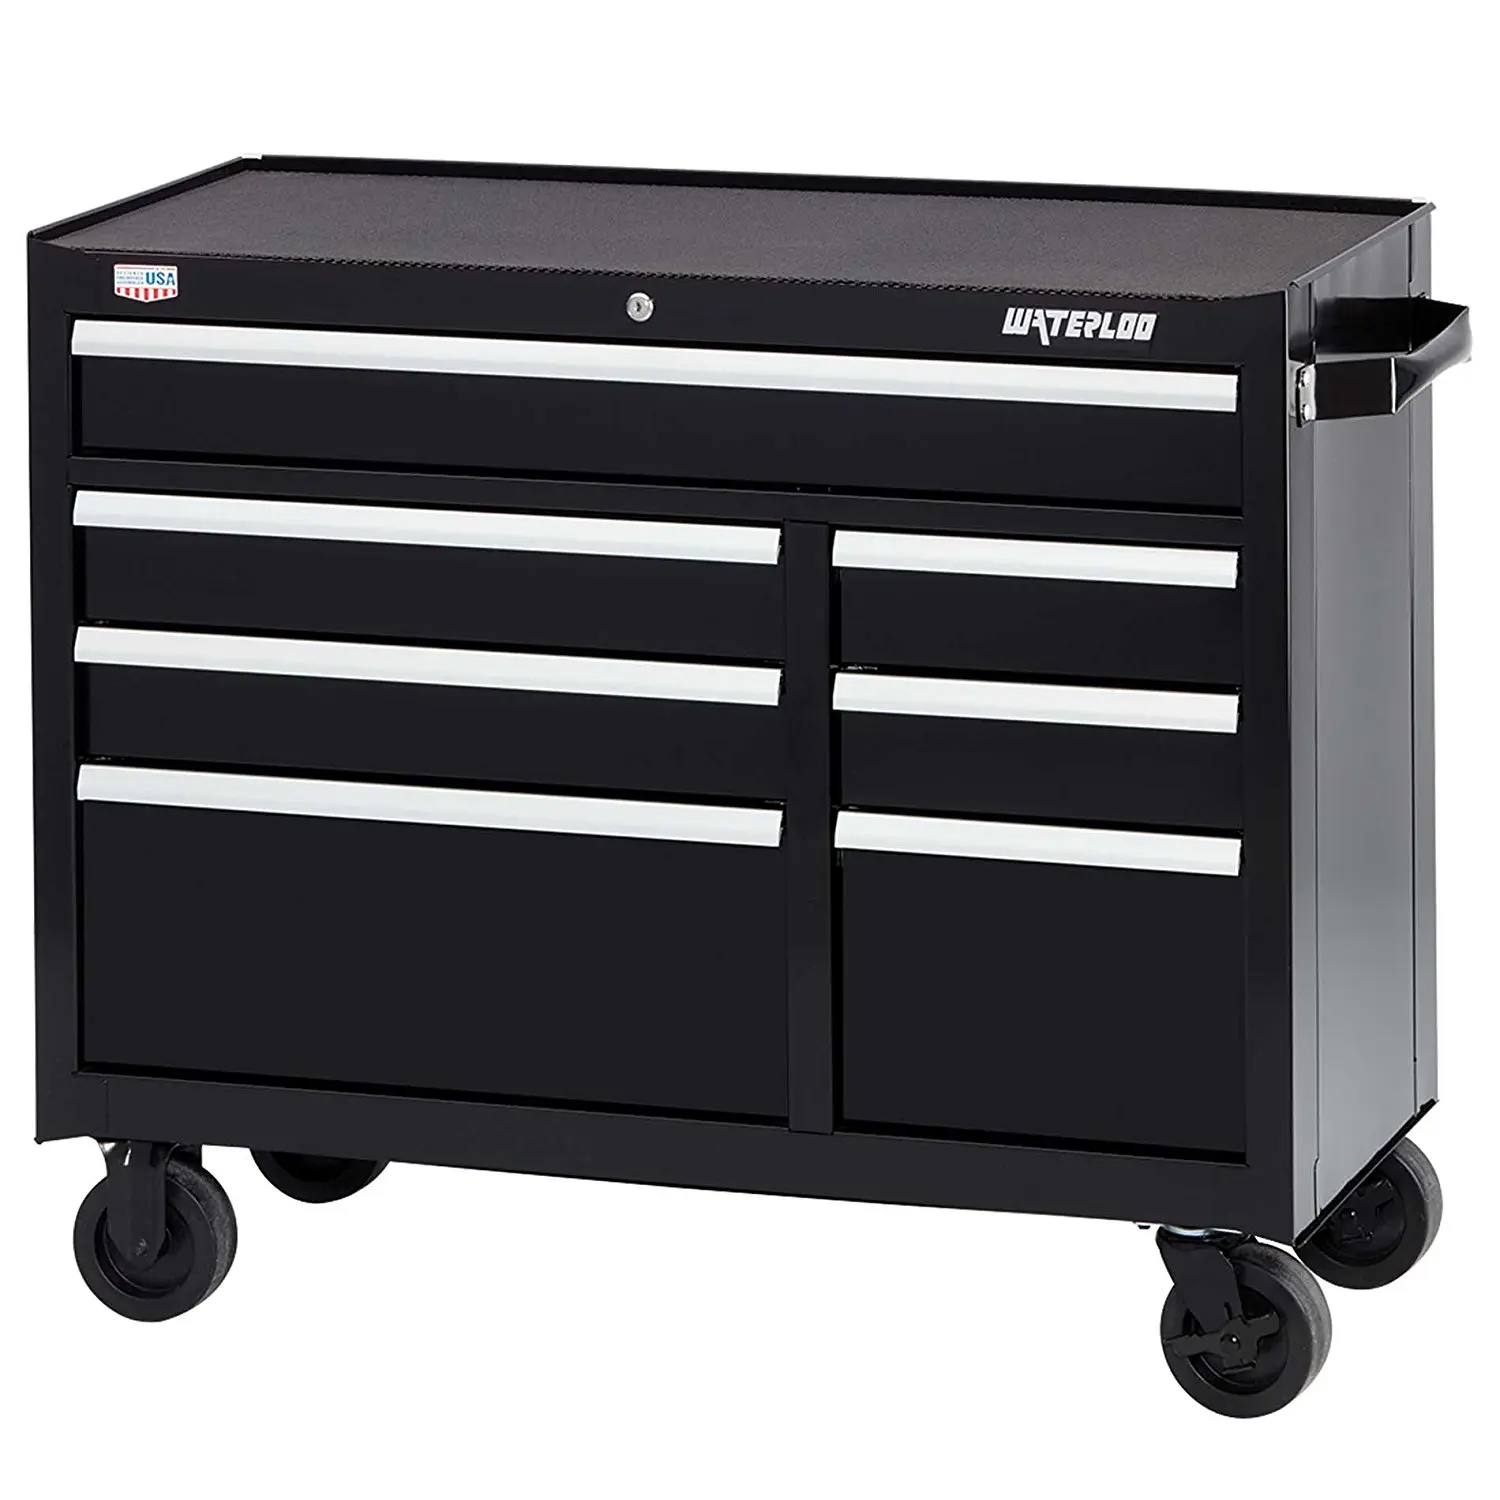 Cheap Waterloo Tool Cabinet Find Waterloo Tool Cabinet Deals On